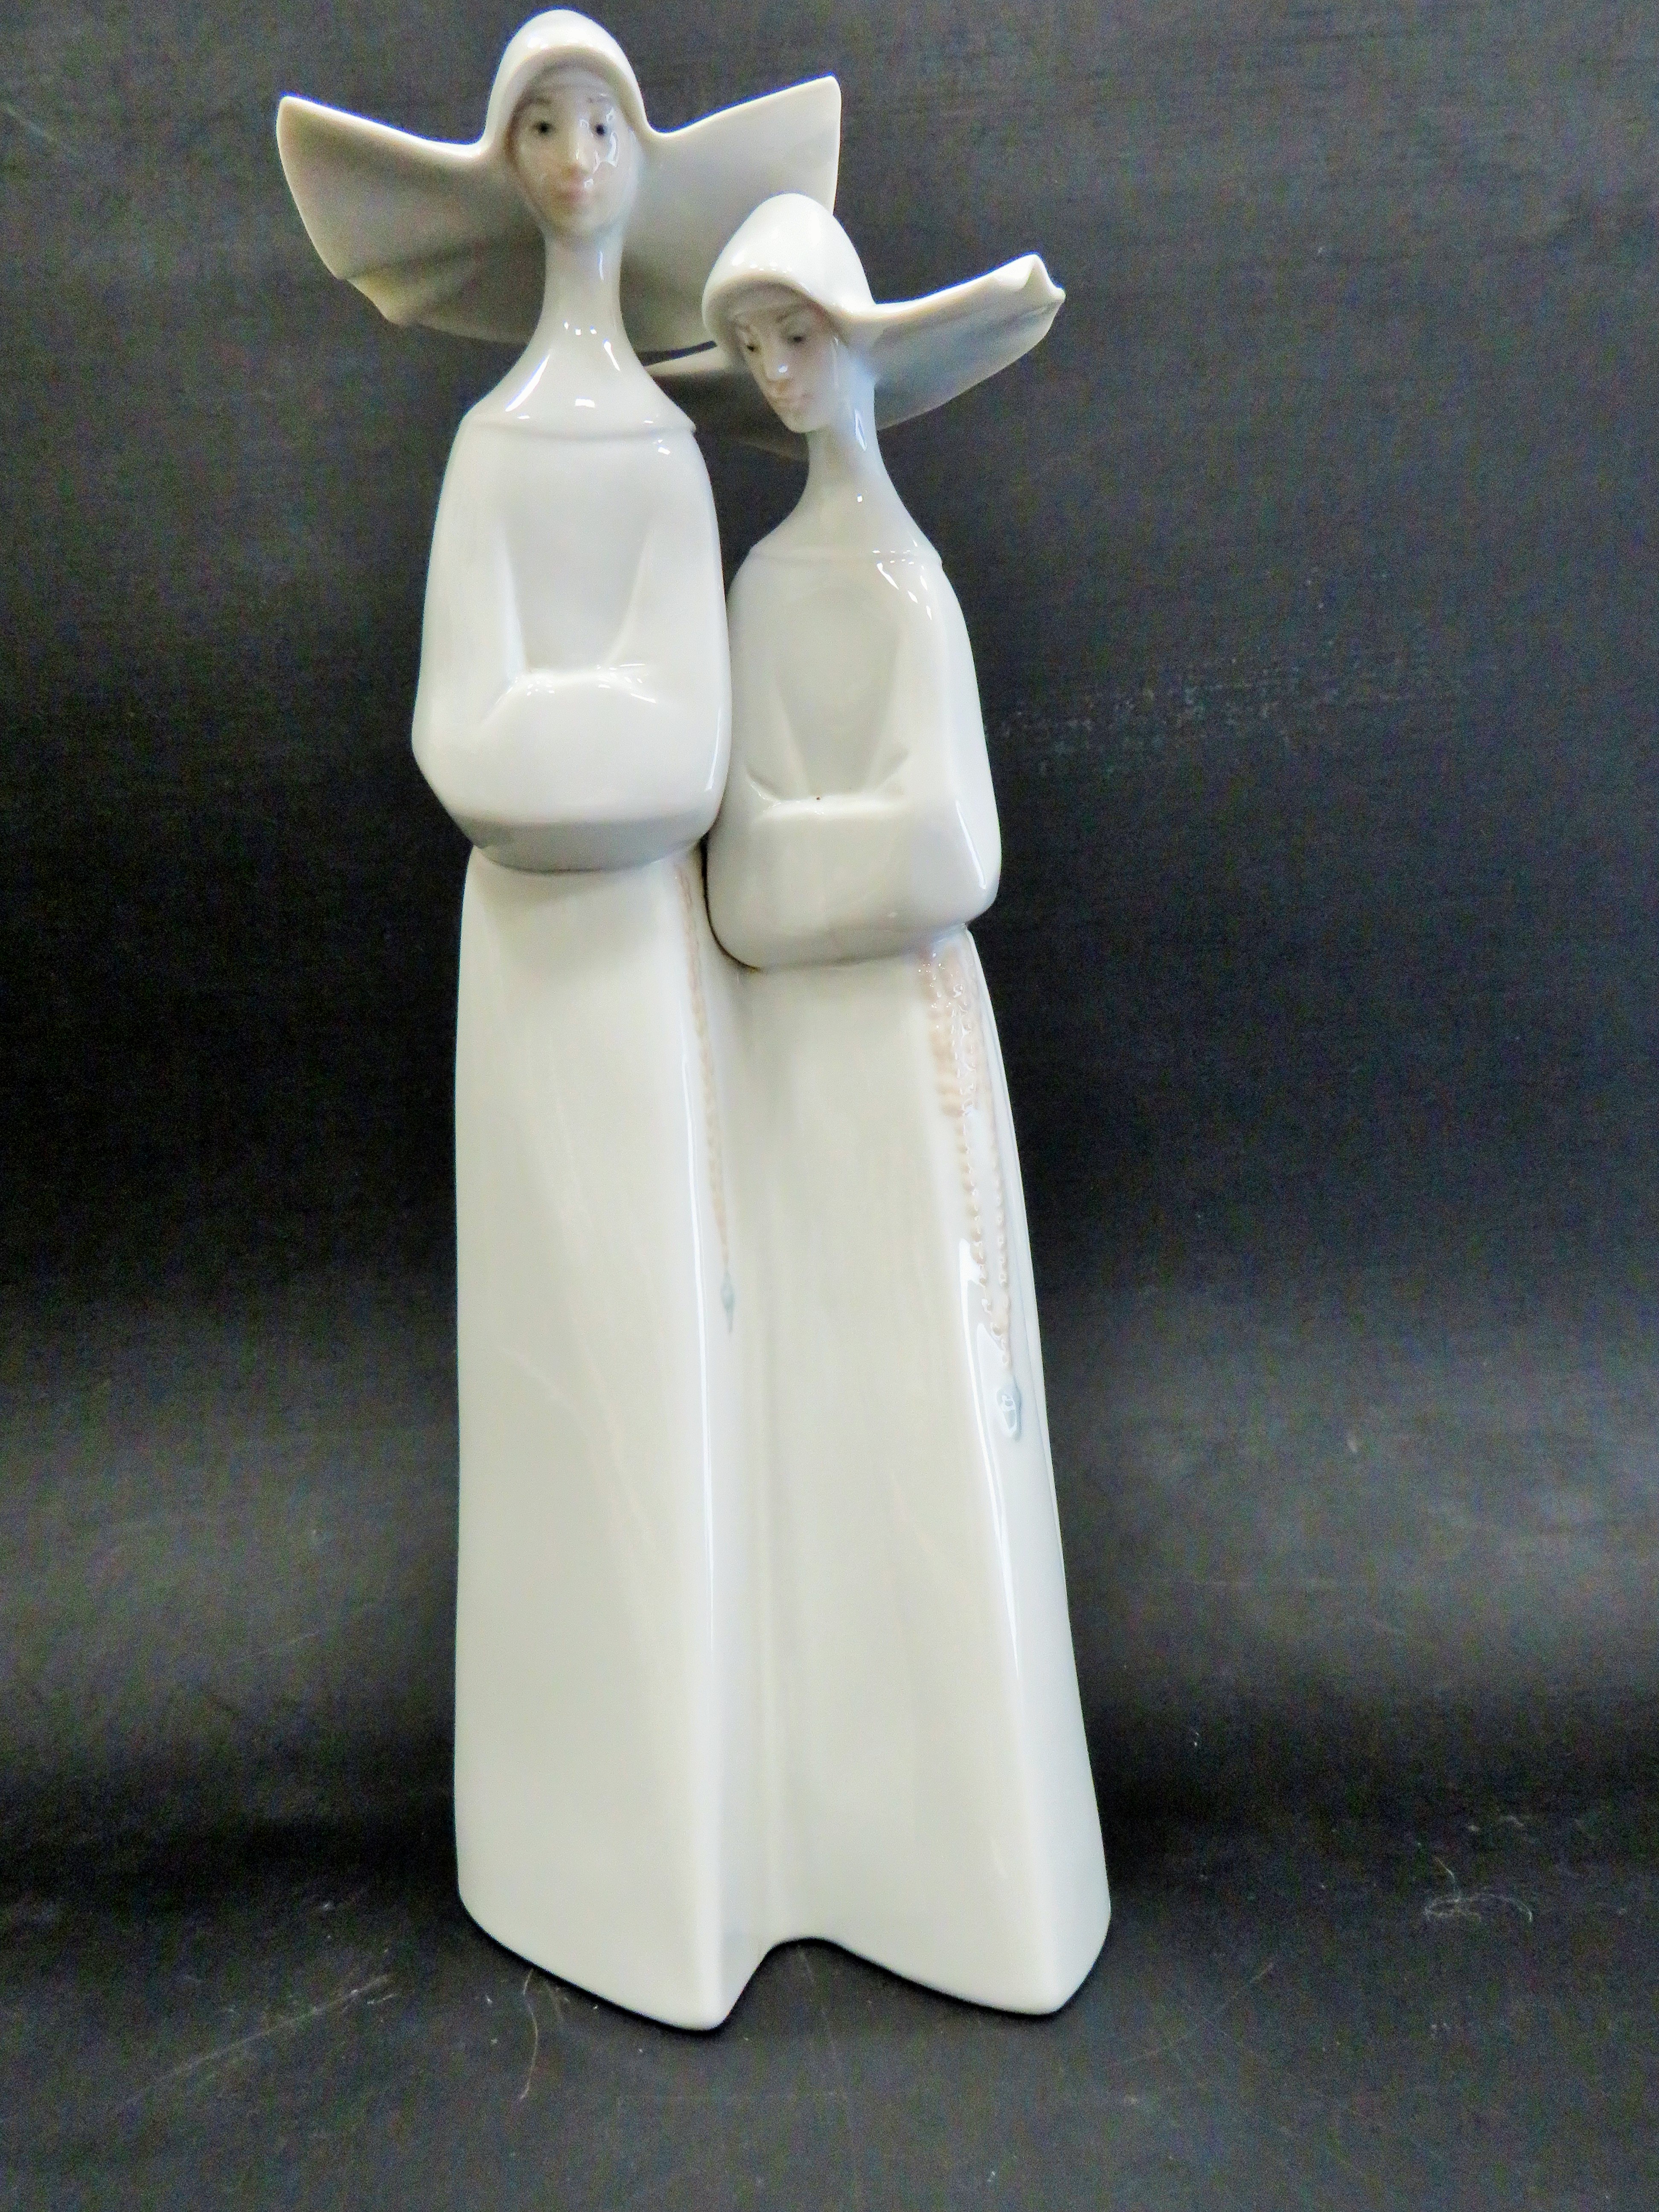 Lladro Figurine 'Two Nuns' 4611 in excellent condition. Measures approx 12 inches tall. See photos - Image 2 of 6